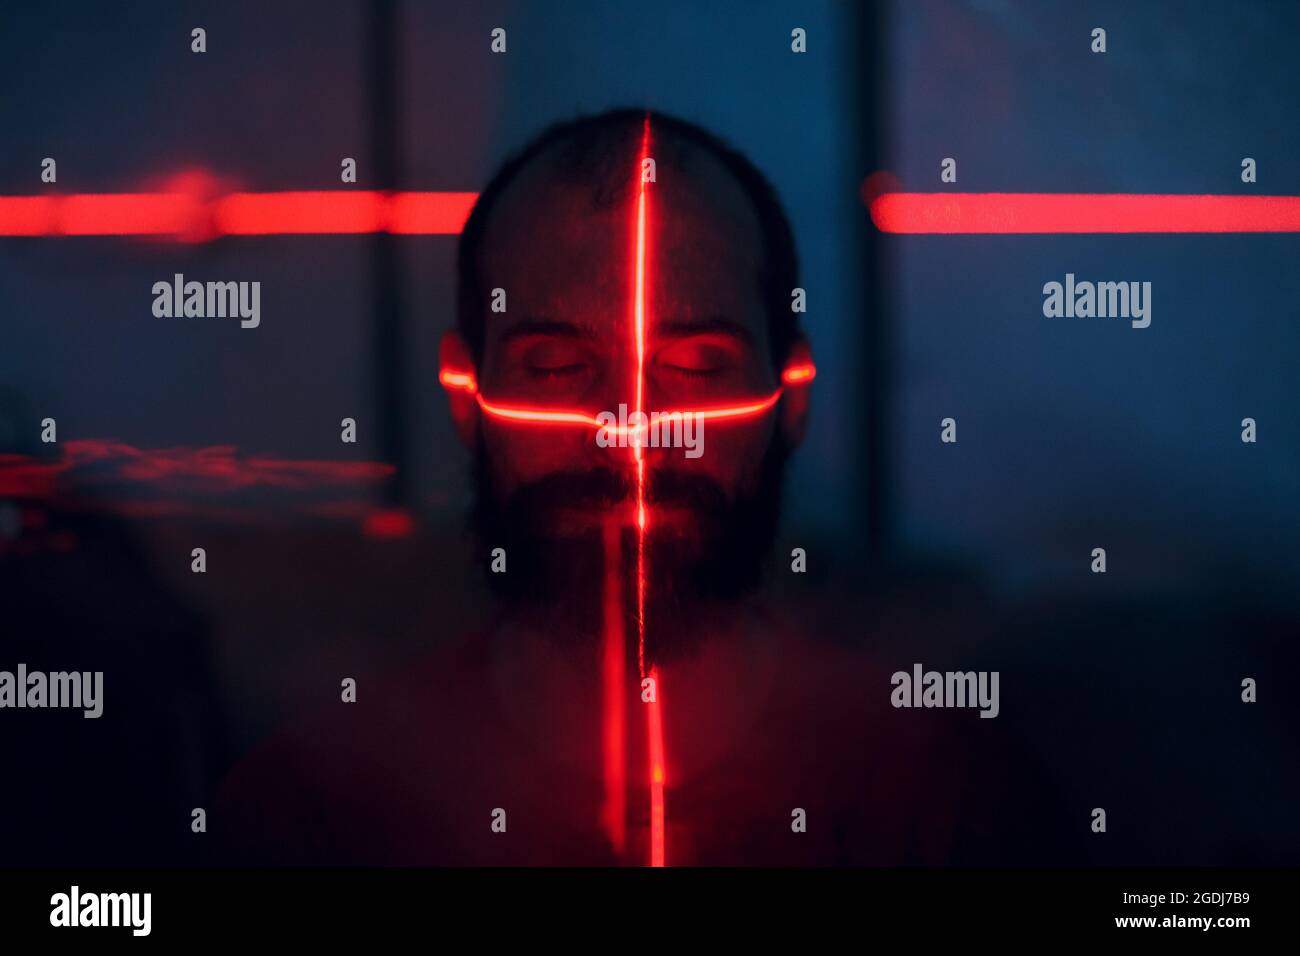 Man in dark with face illuminated by scan red laser on contour. Stock Photo